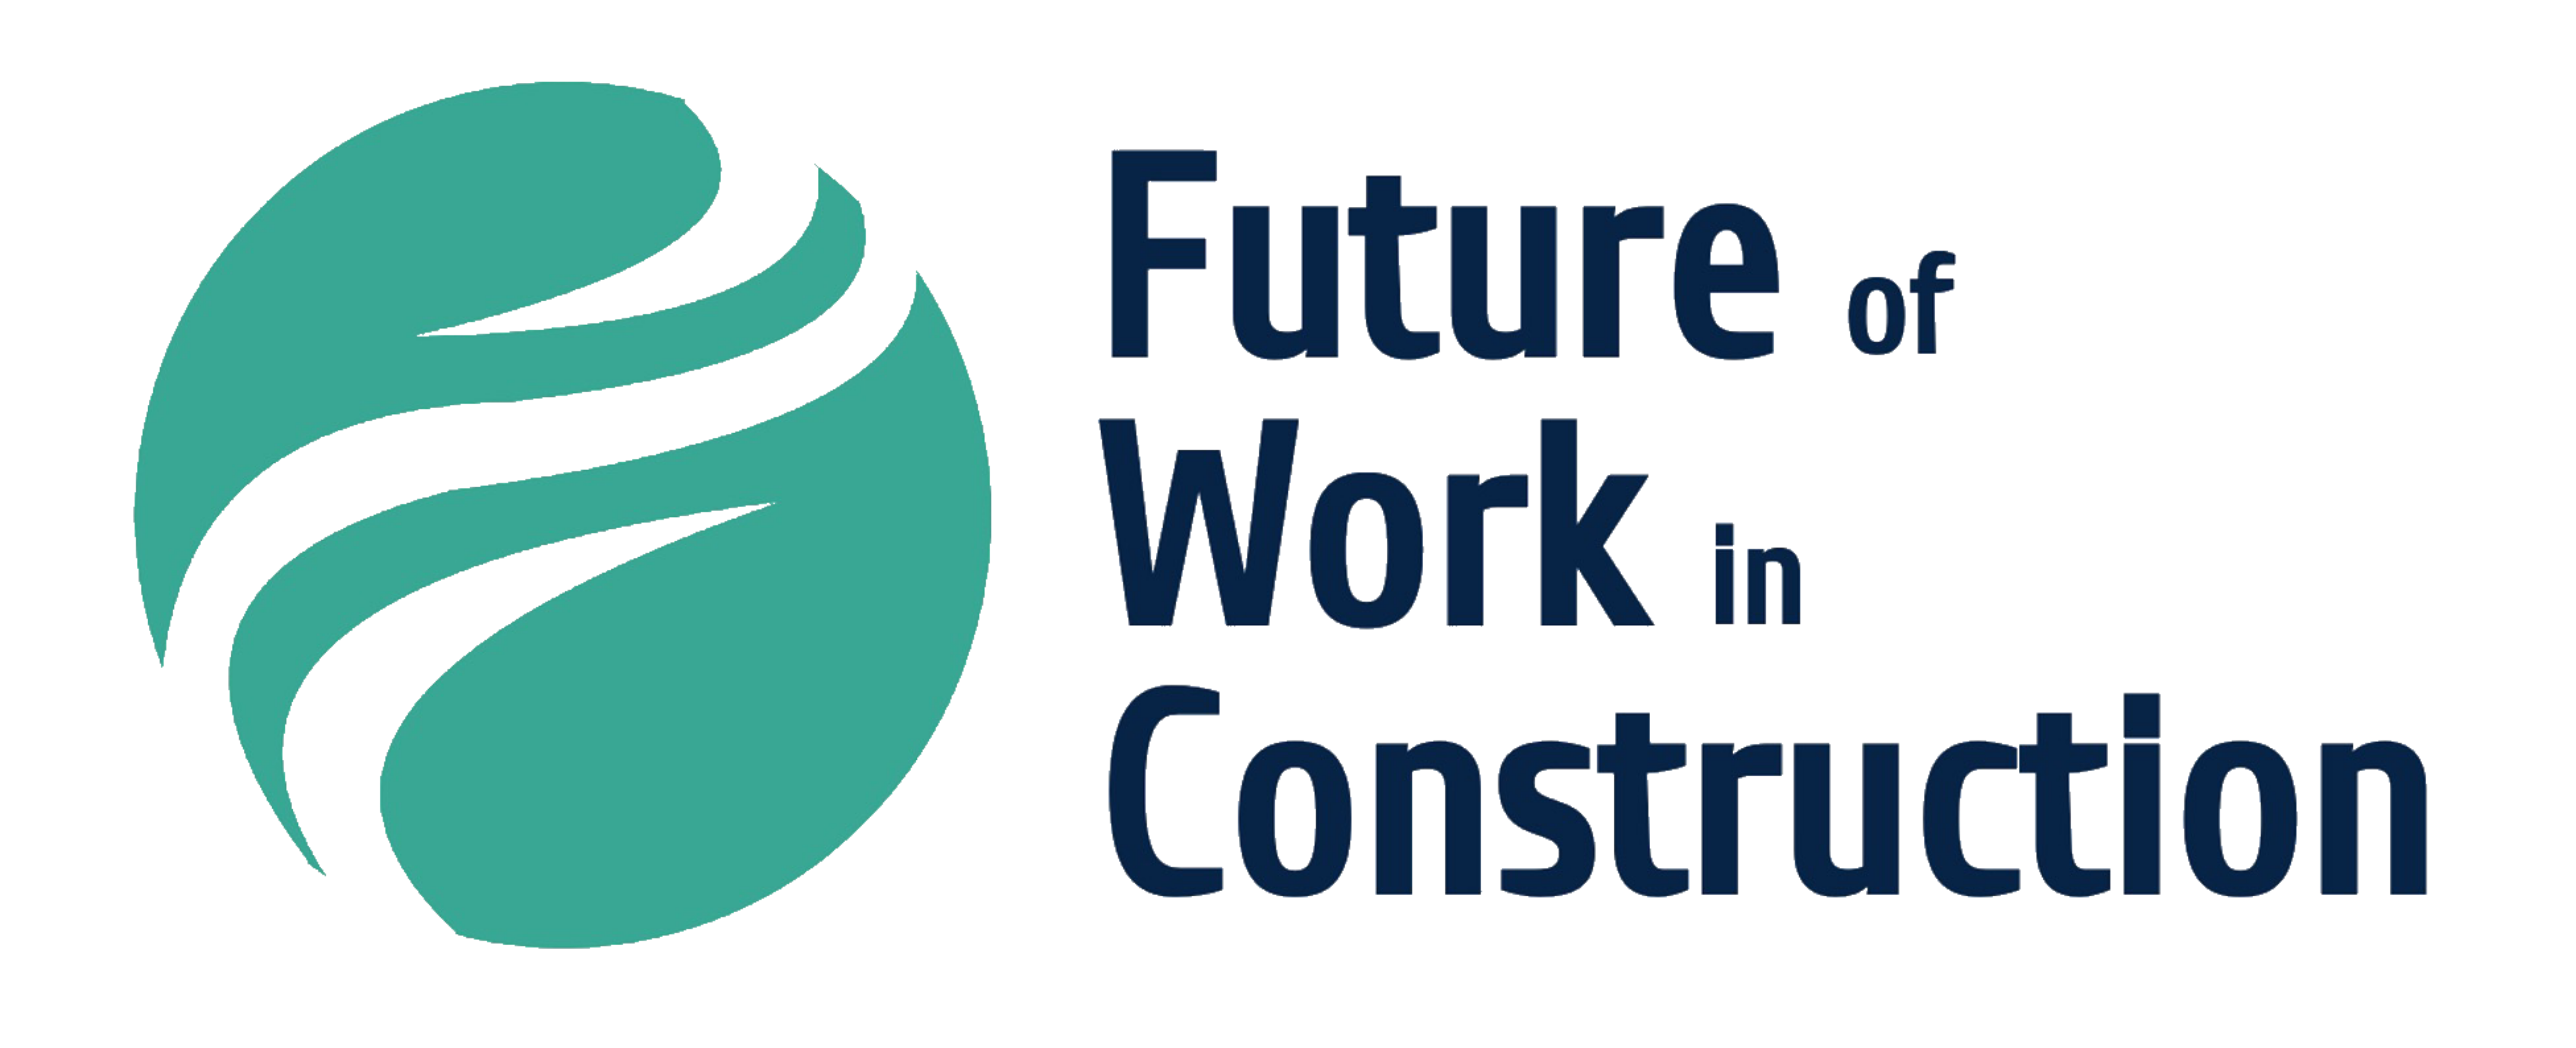 Future of Work in Construction